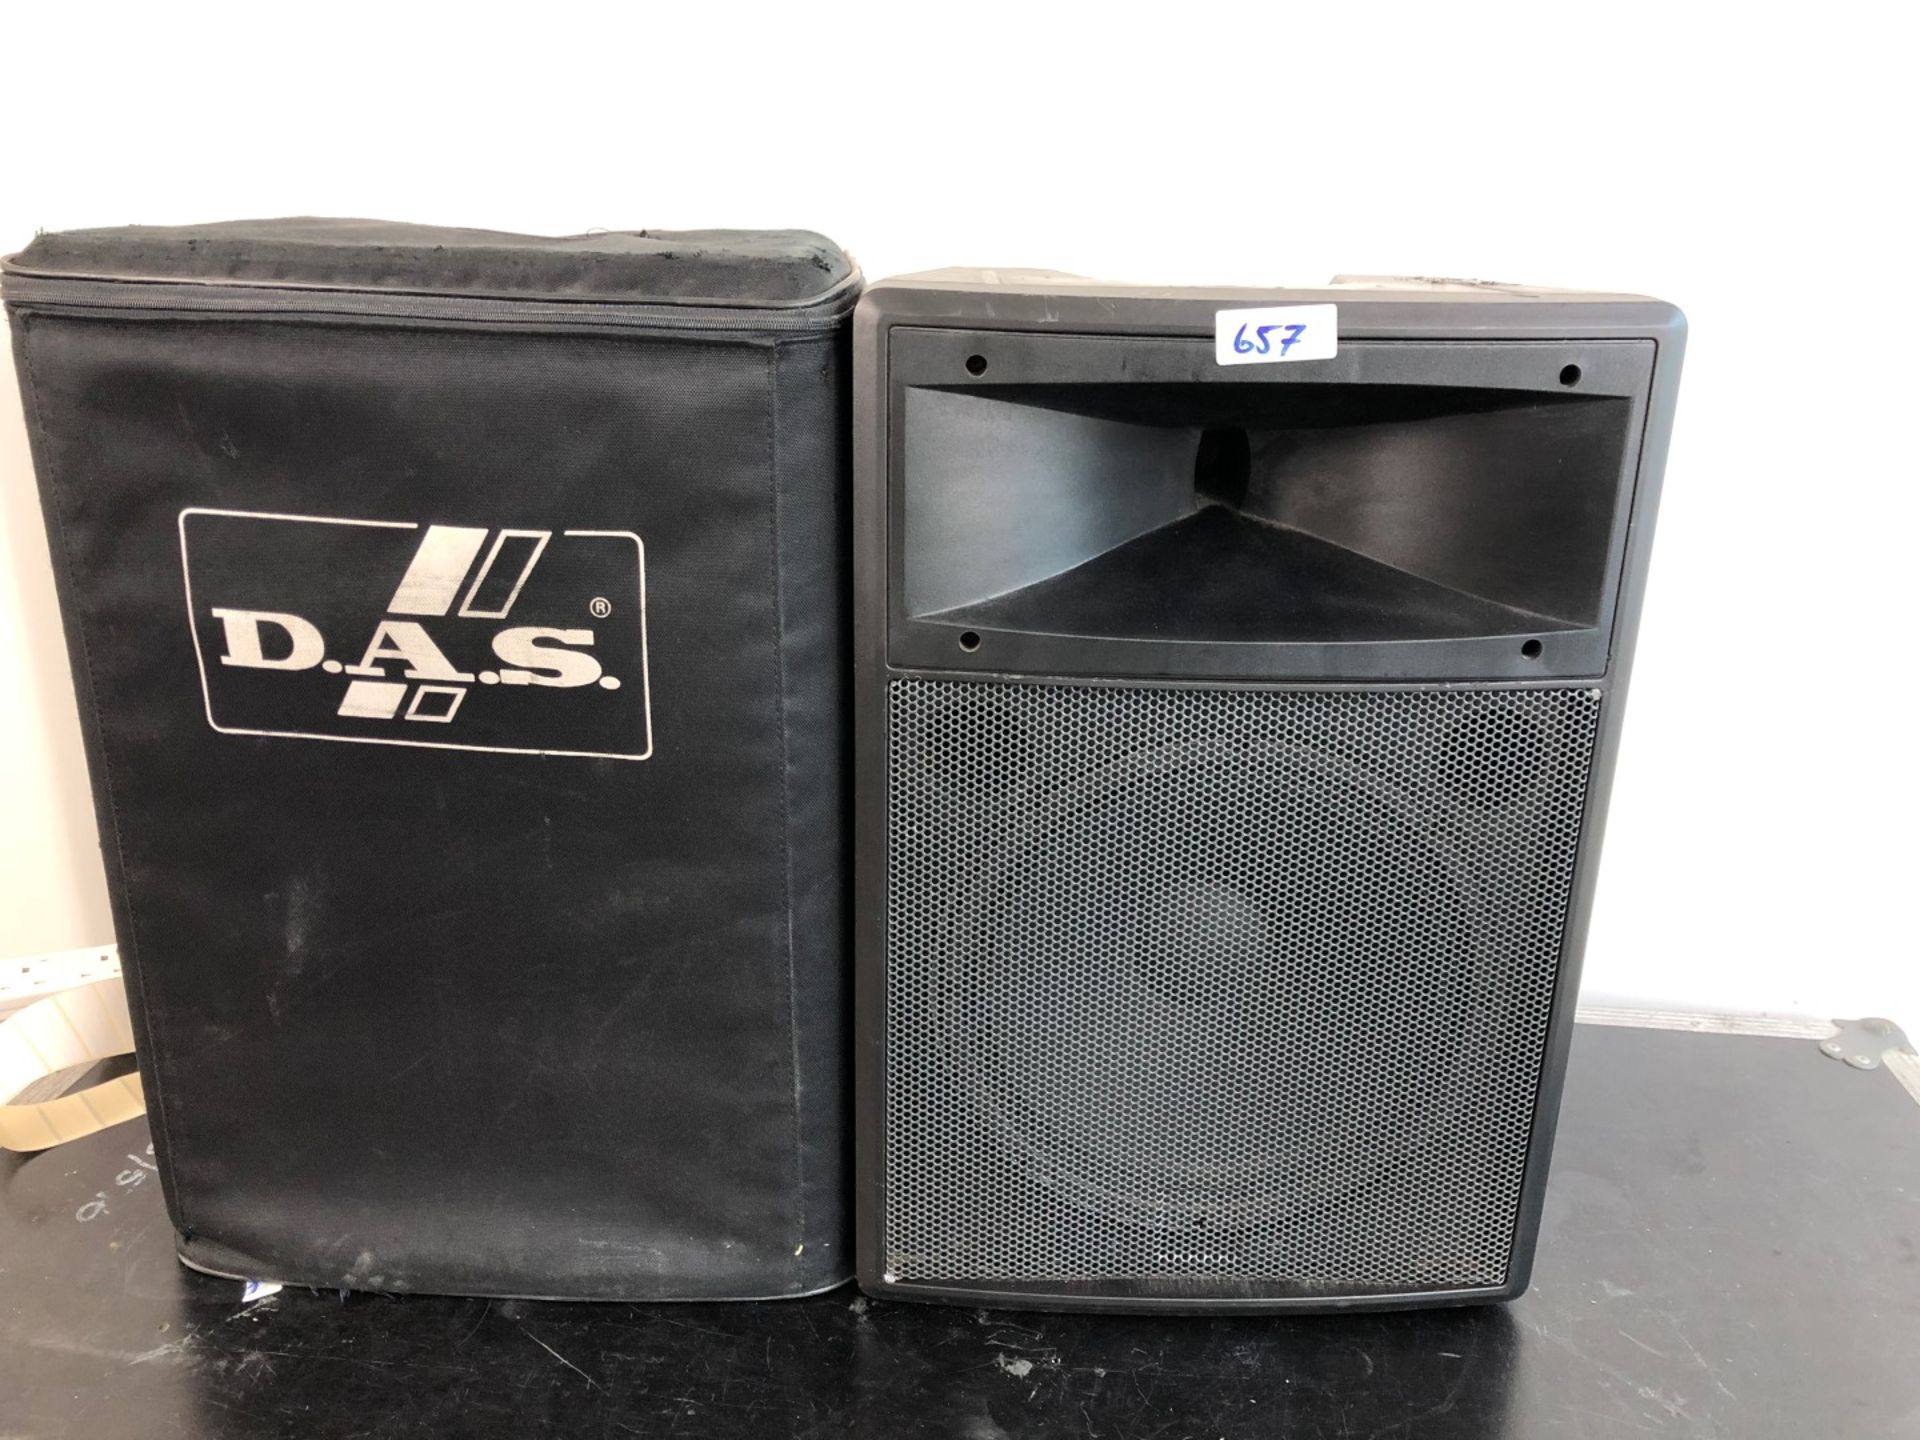 1 x DAS Speaker With Cover - Ref: 657 - CL581 - Location: Altrincham WA14Items will be available